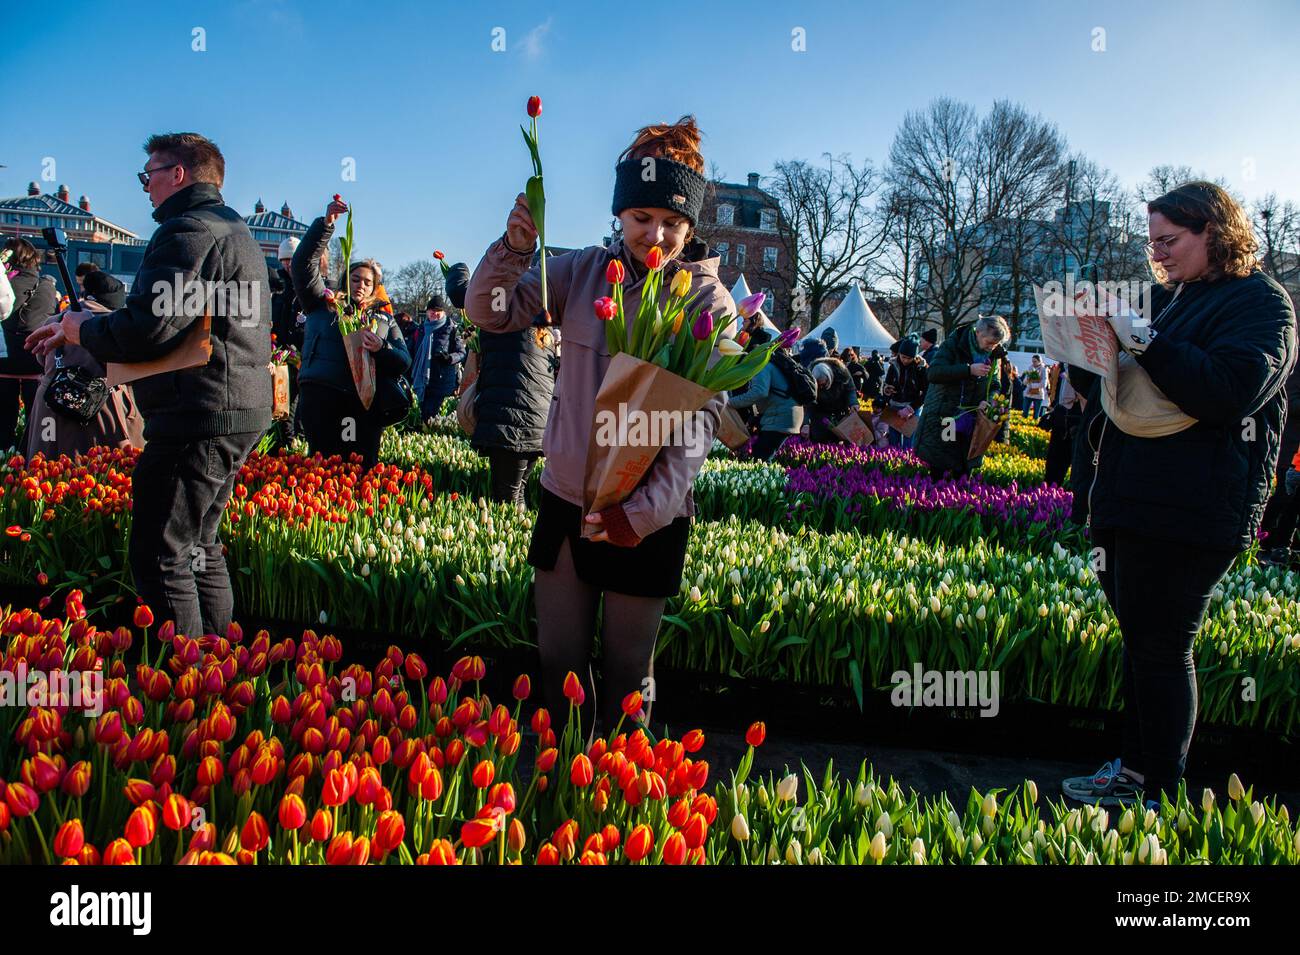 A woman seen putting another tulip in her paper bag. Each year on the 3rd Saturday of January, the National Tulip Day is celebrated in Amsterdam. Dutch tulip growers built a huge picking garden with more than 200,000 colorful tulips at the Museumplein in Amsterdam. Visitors are allowed to pick tulips for free. The event was opened by Olympic skating champion, Irene Schouten. Prior to the opening, she christened a new tulip: Tulipa 'Dutch Pearl' as a reference to the world - famous painting 'The girl with a pearl earring' by Johannes Vermeer. Stock Photo